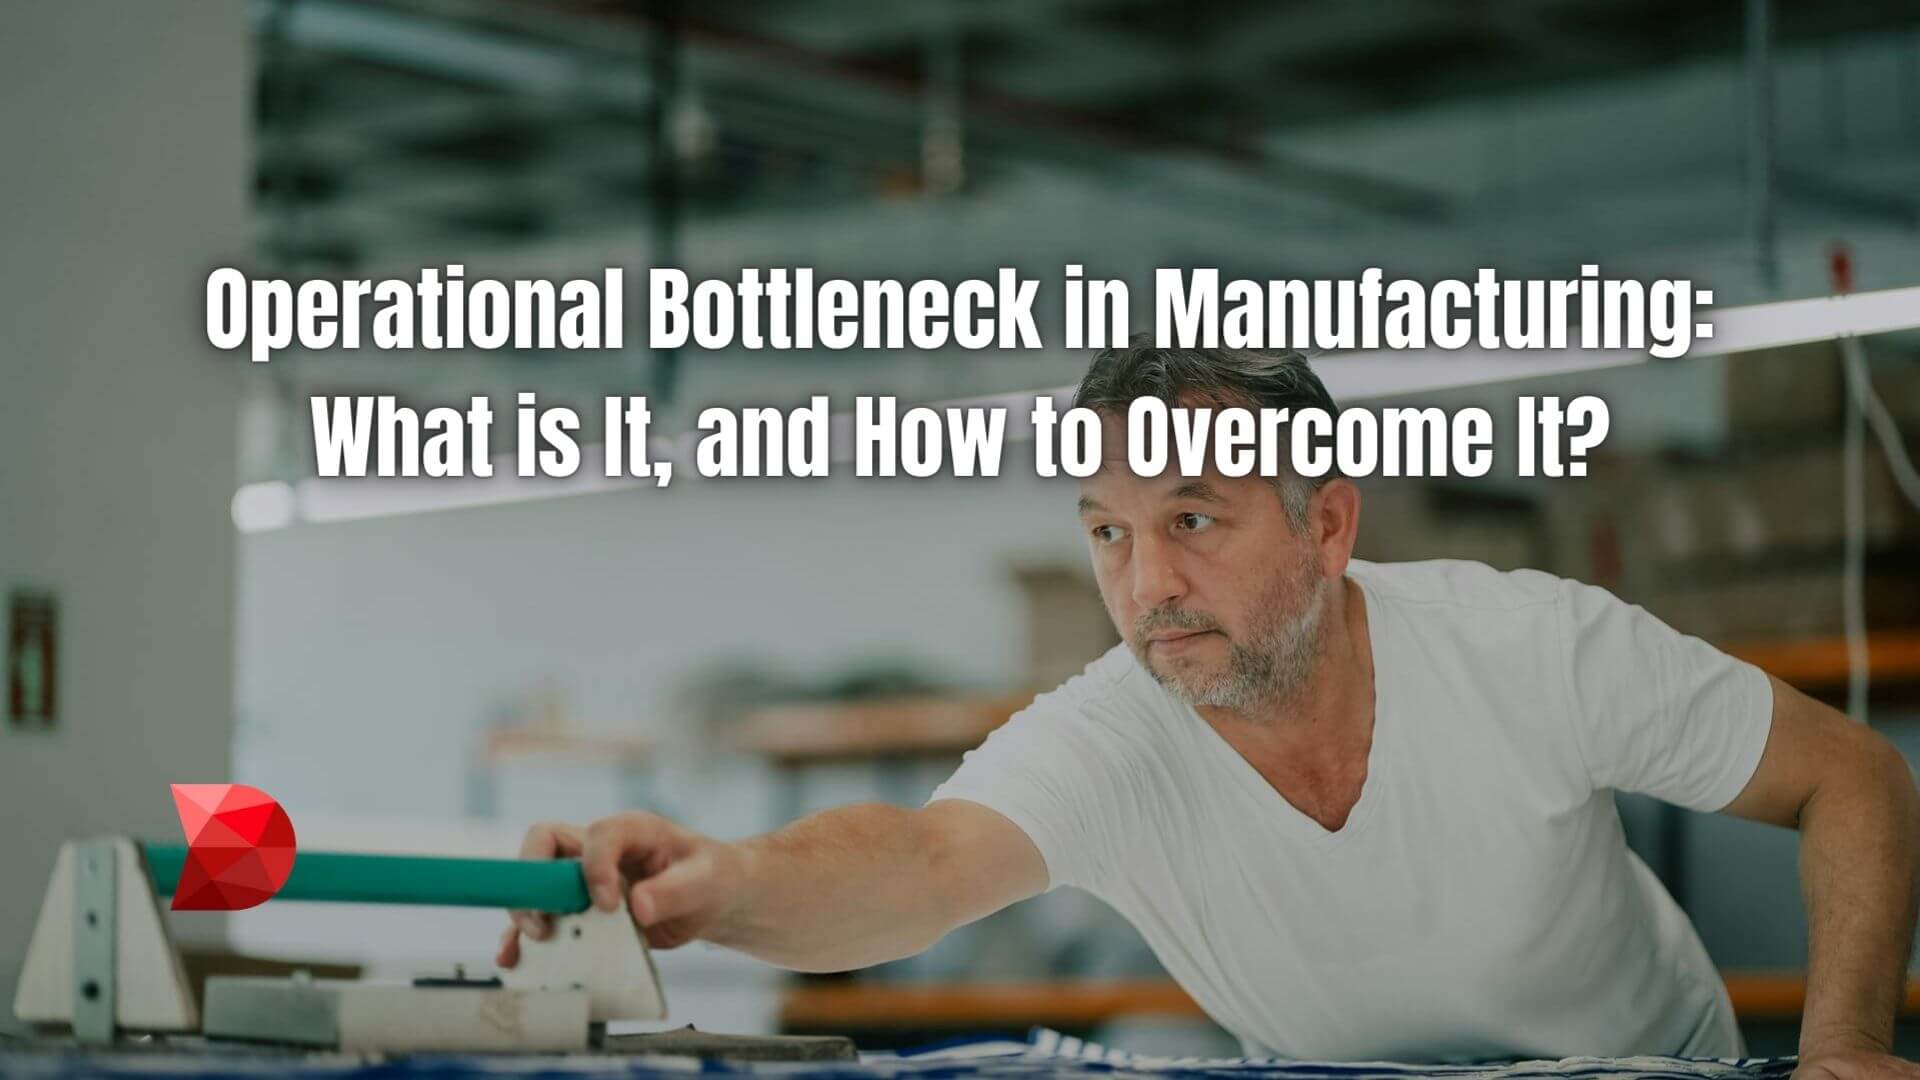 Enhance your manufacturing efficiency! Discover the root causes of operational bottlenecks and effective strategies for improvement.